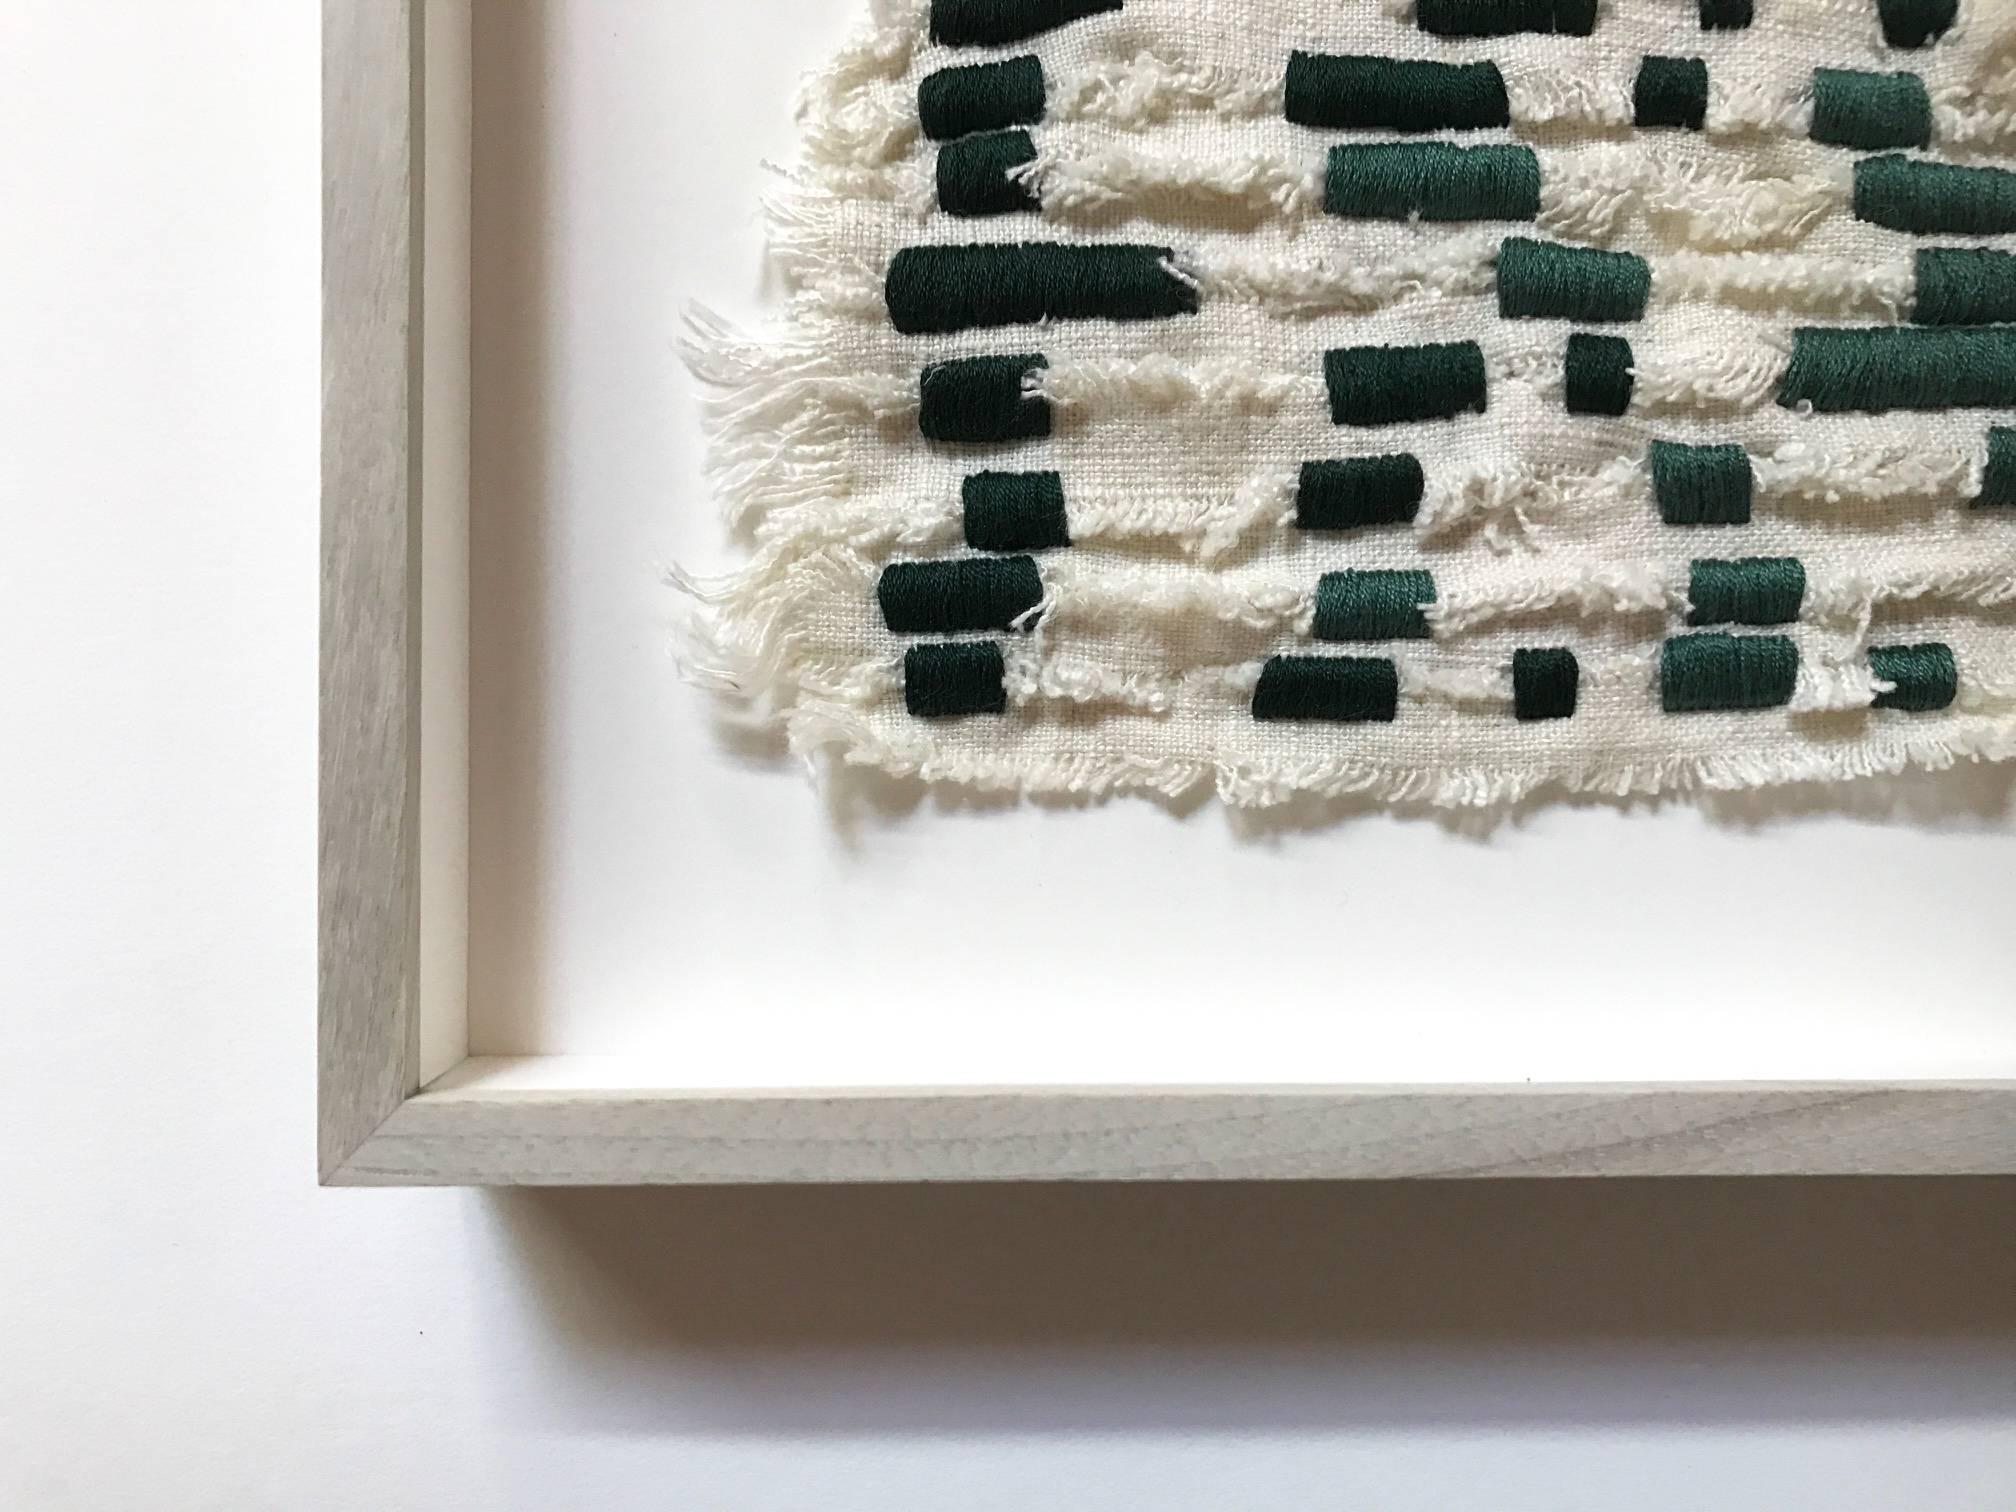 Exquisite textile weaving by Bay Area artist, Amy Kim Keeler, circa 2017. Beautifully framed in a bleached walnut shadowbox. 


Artist notes:
The fabric is essentially cut and shredded into strips and shapes with a sense of destruction, moving